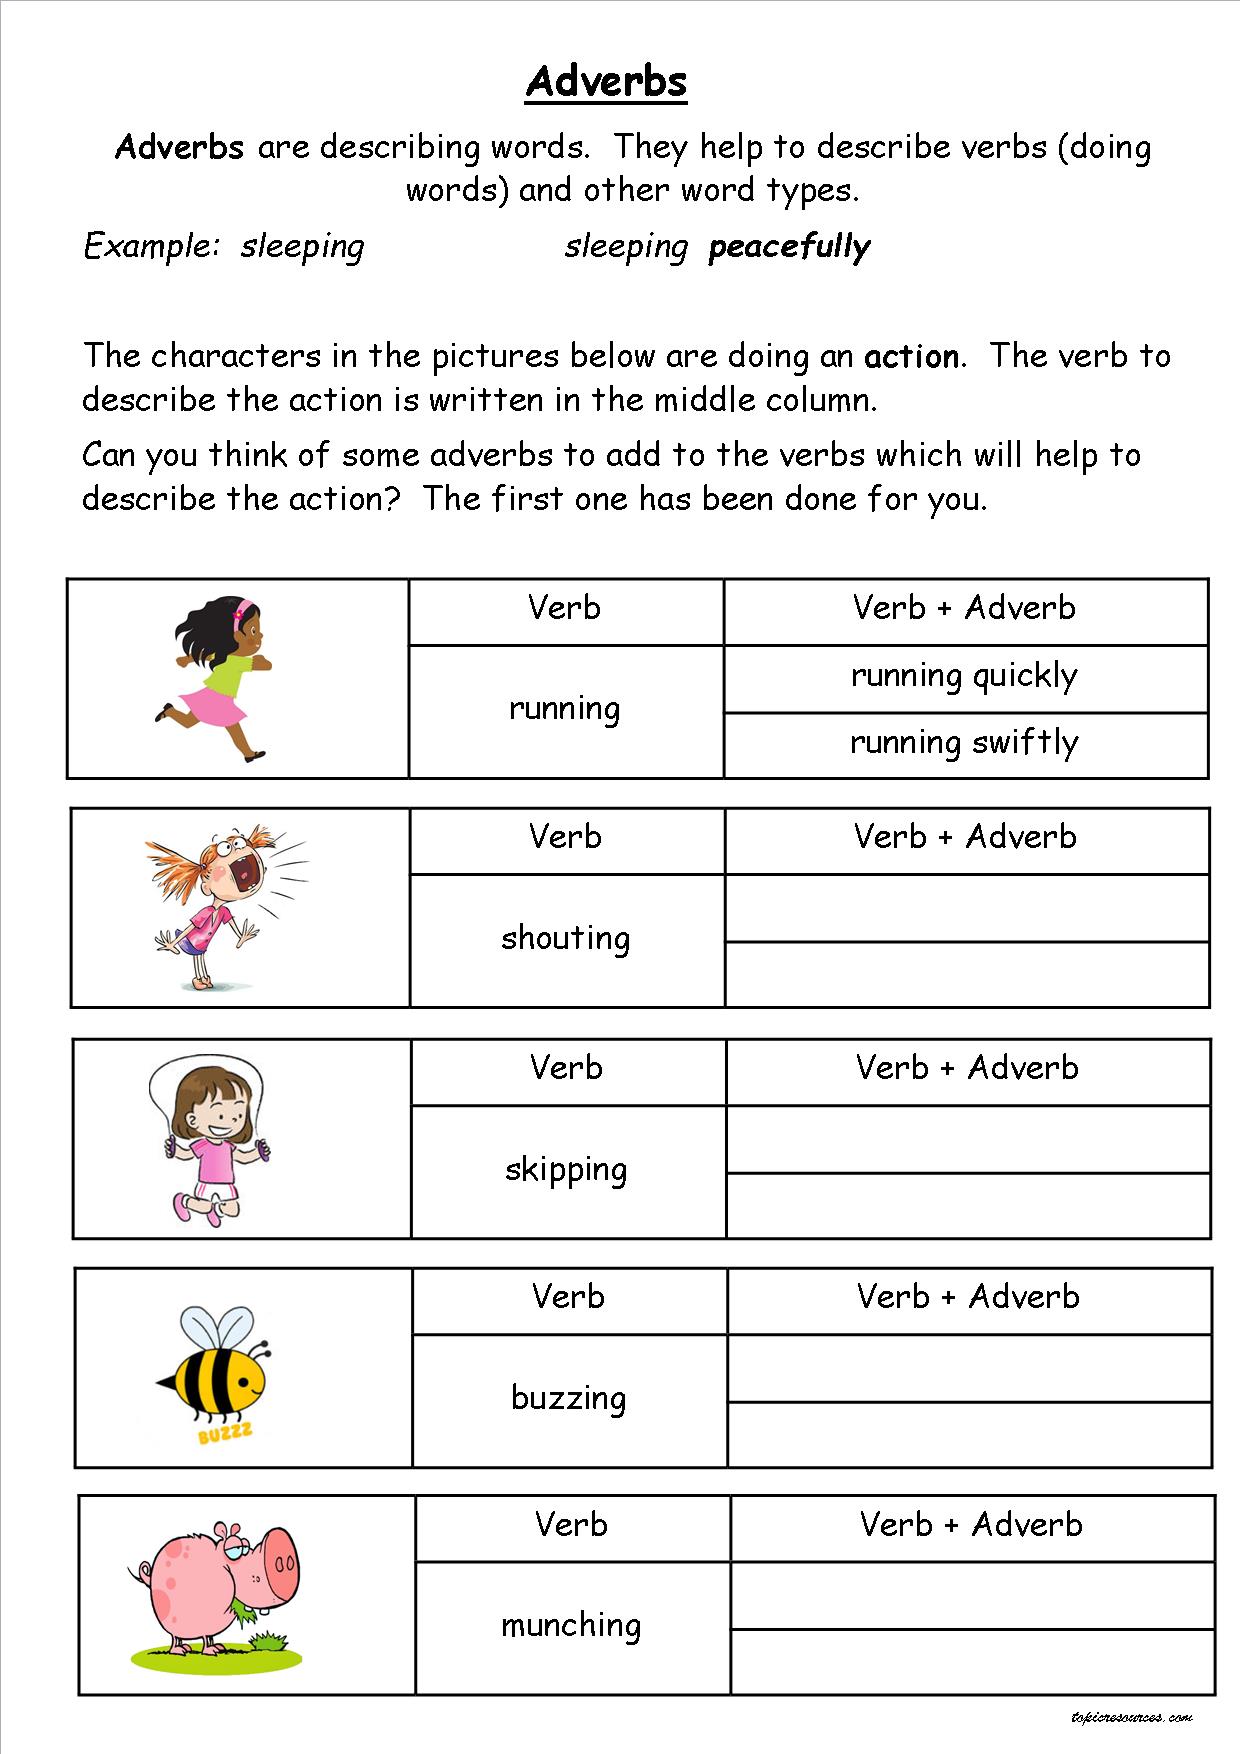 english-worksheets-resources